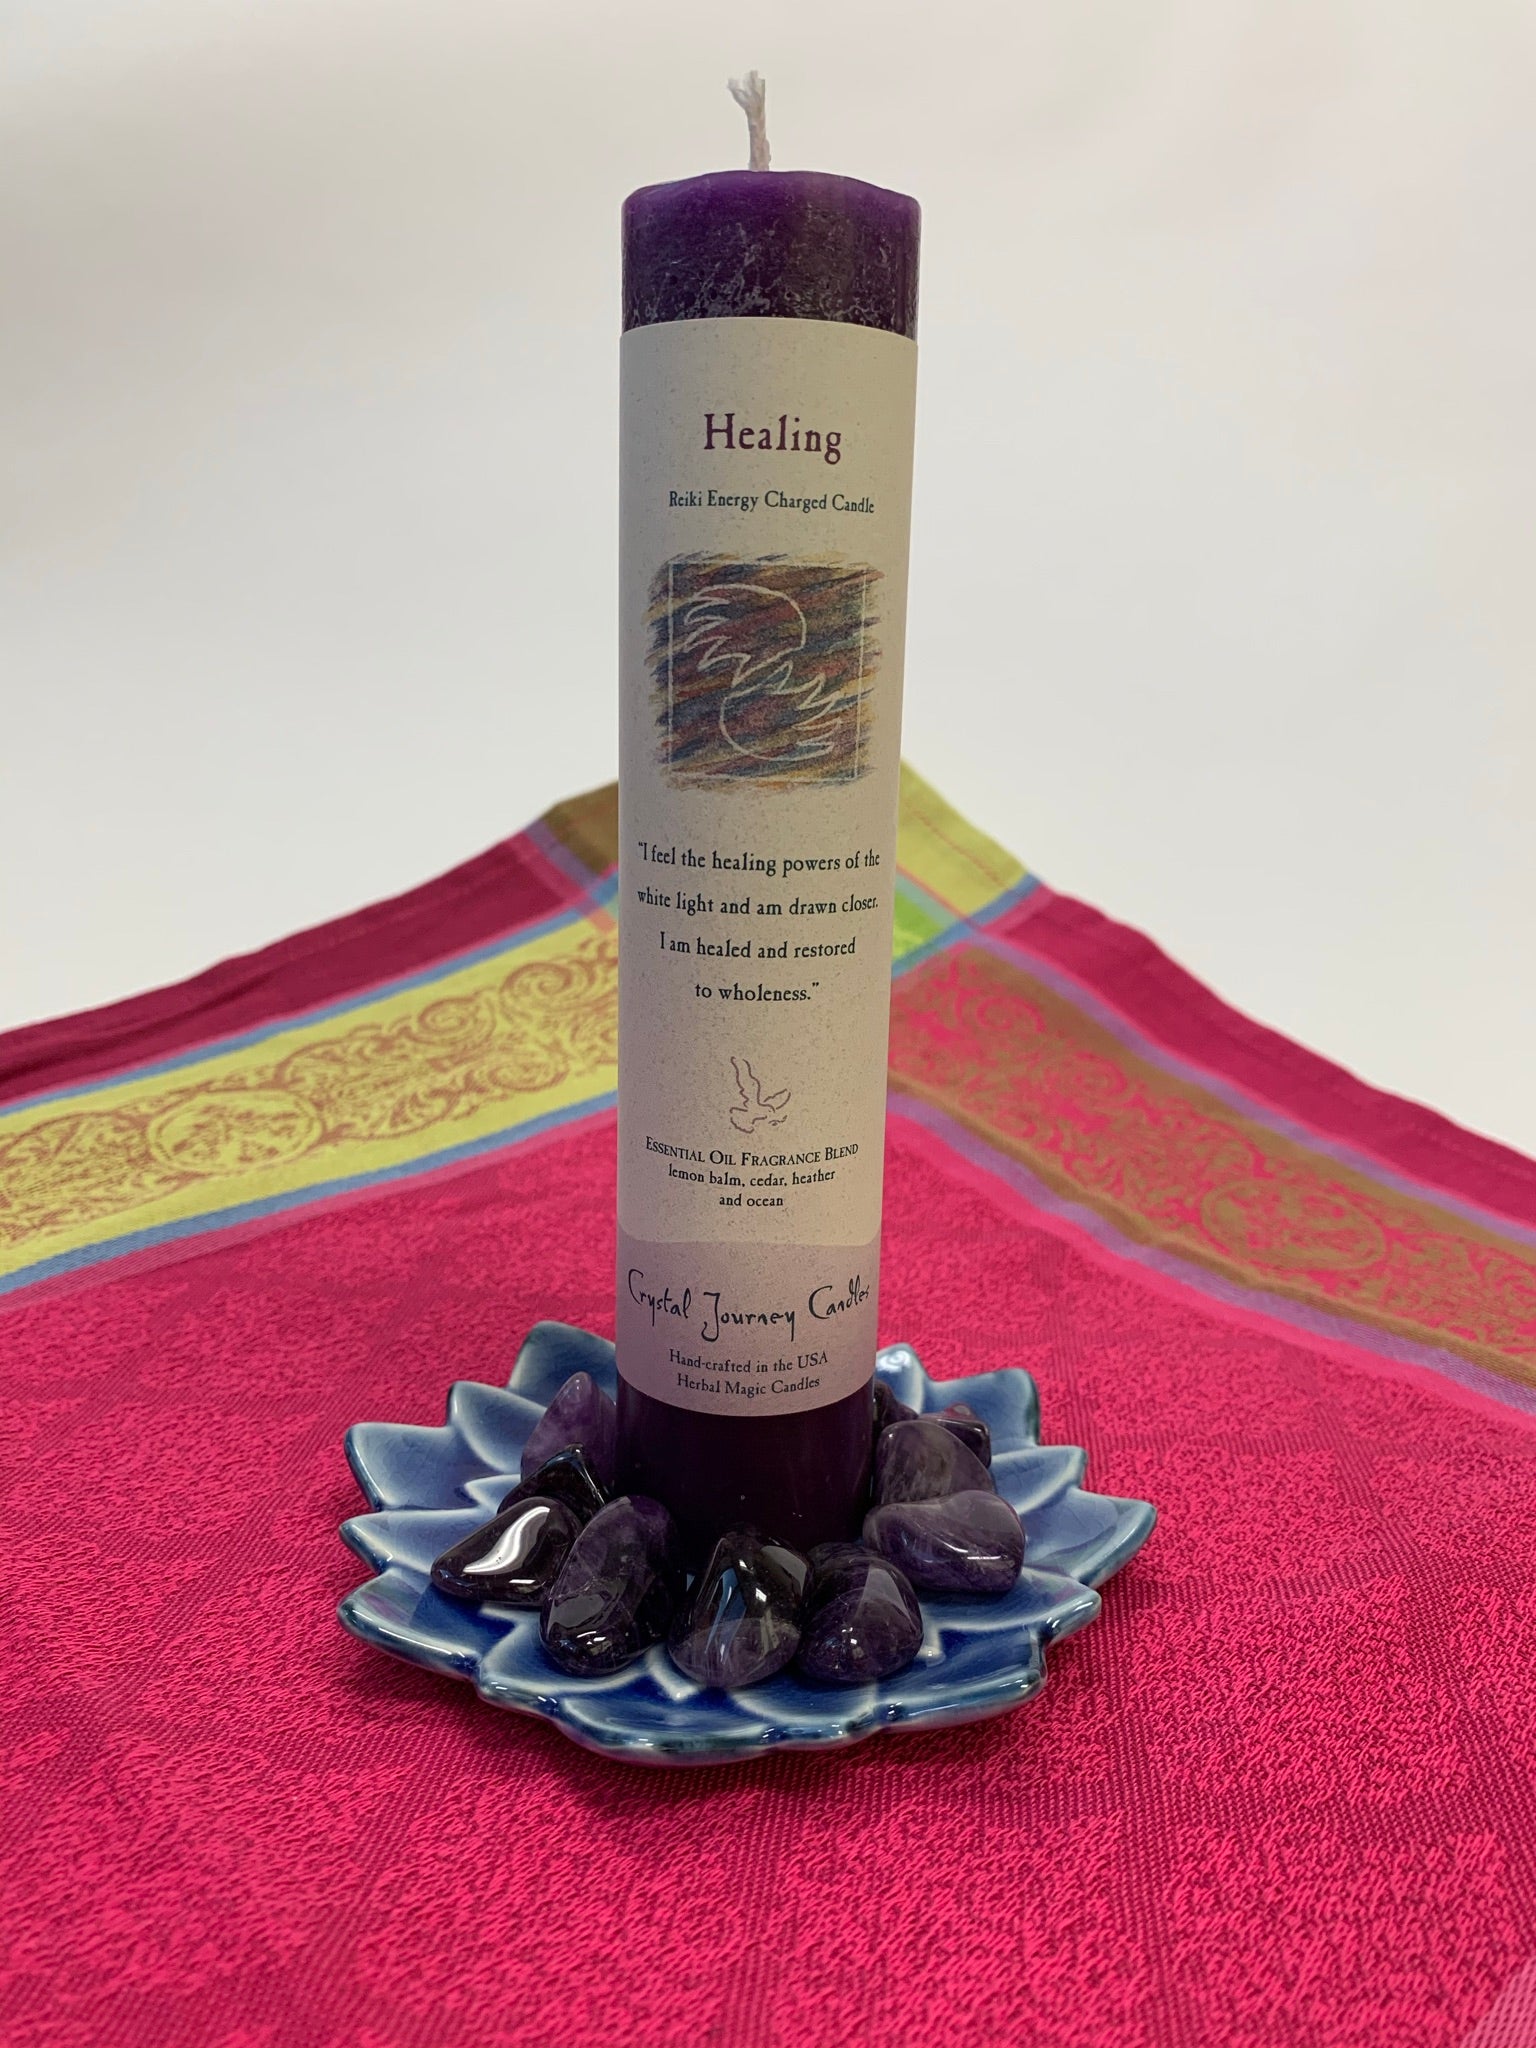 Reiki-charged pillar candle for "Healing." It is handcrafted and scented using essential oils. An affirmation/prayer is printed on the label, a well as a listing of the essential oils used (lemon balm, cedar, heather, ocean). It is approximately 7"x2½". Perfect for meditation, prayer, visualization or quiet time. This deep purple candle and its label are both visually appealing.